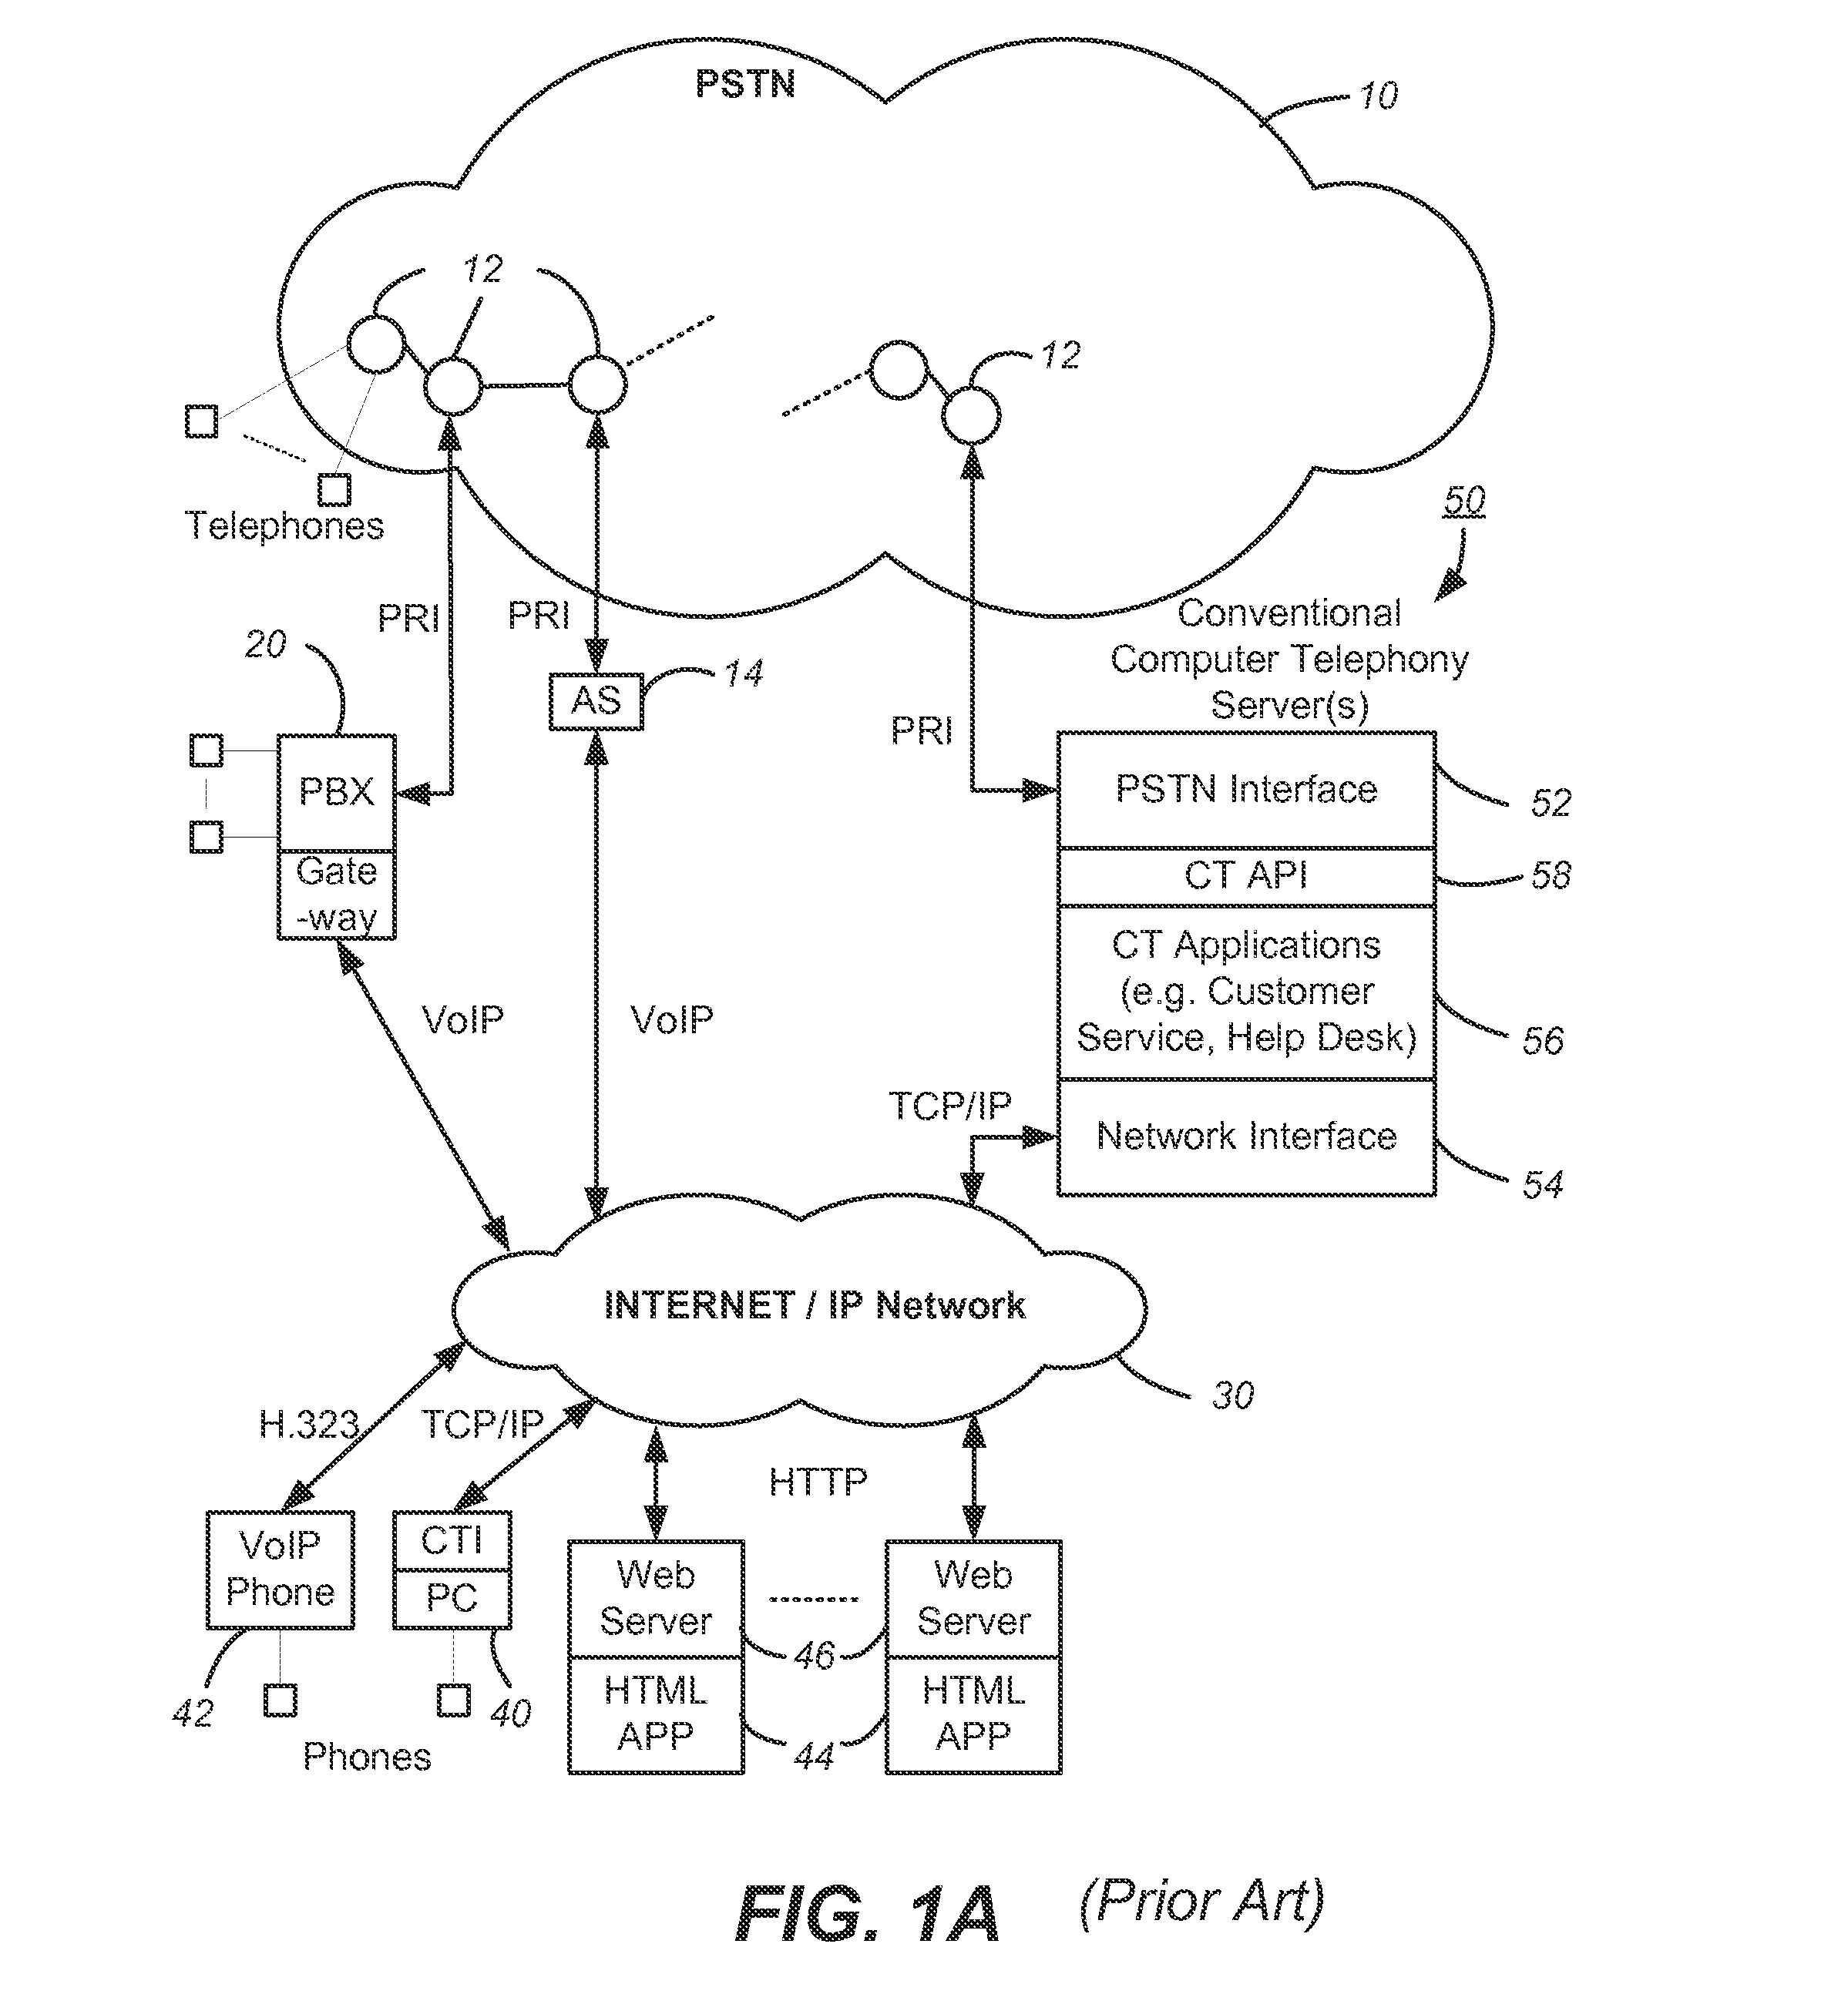 System and Method for Dynamic Telephony Resource Allocation Between Premise and Hosted Facilities